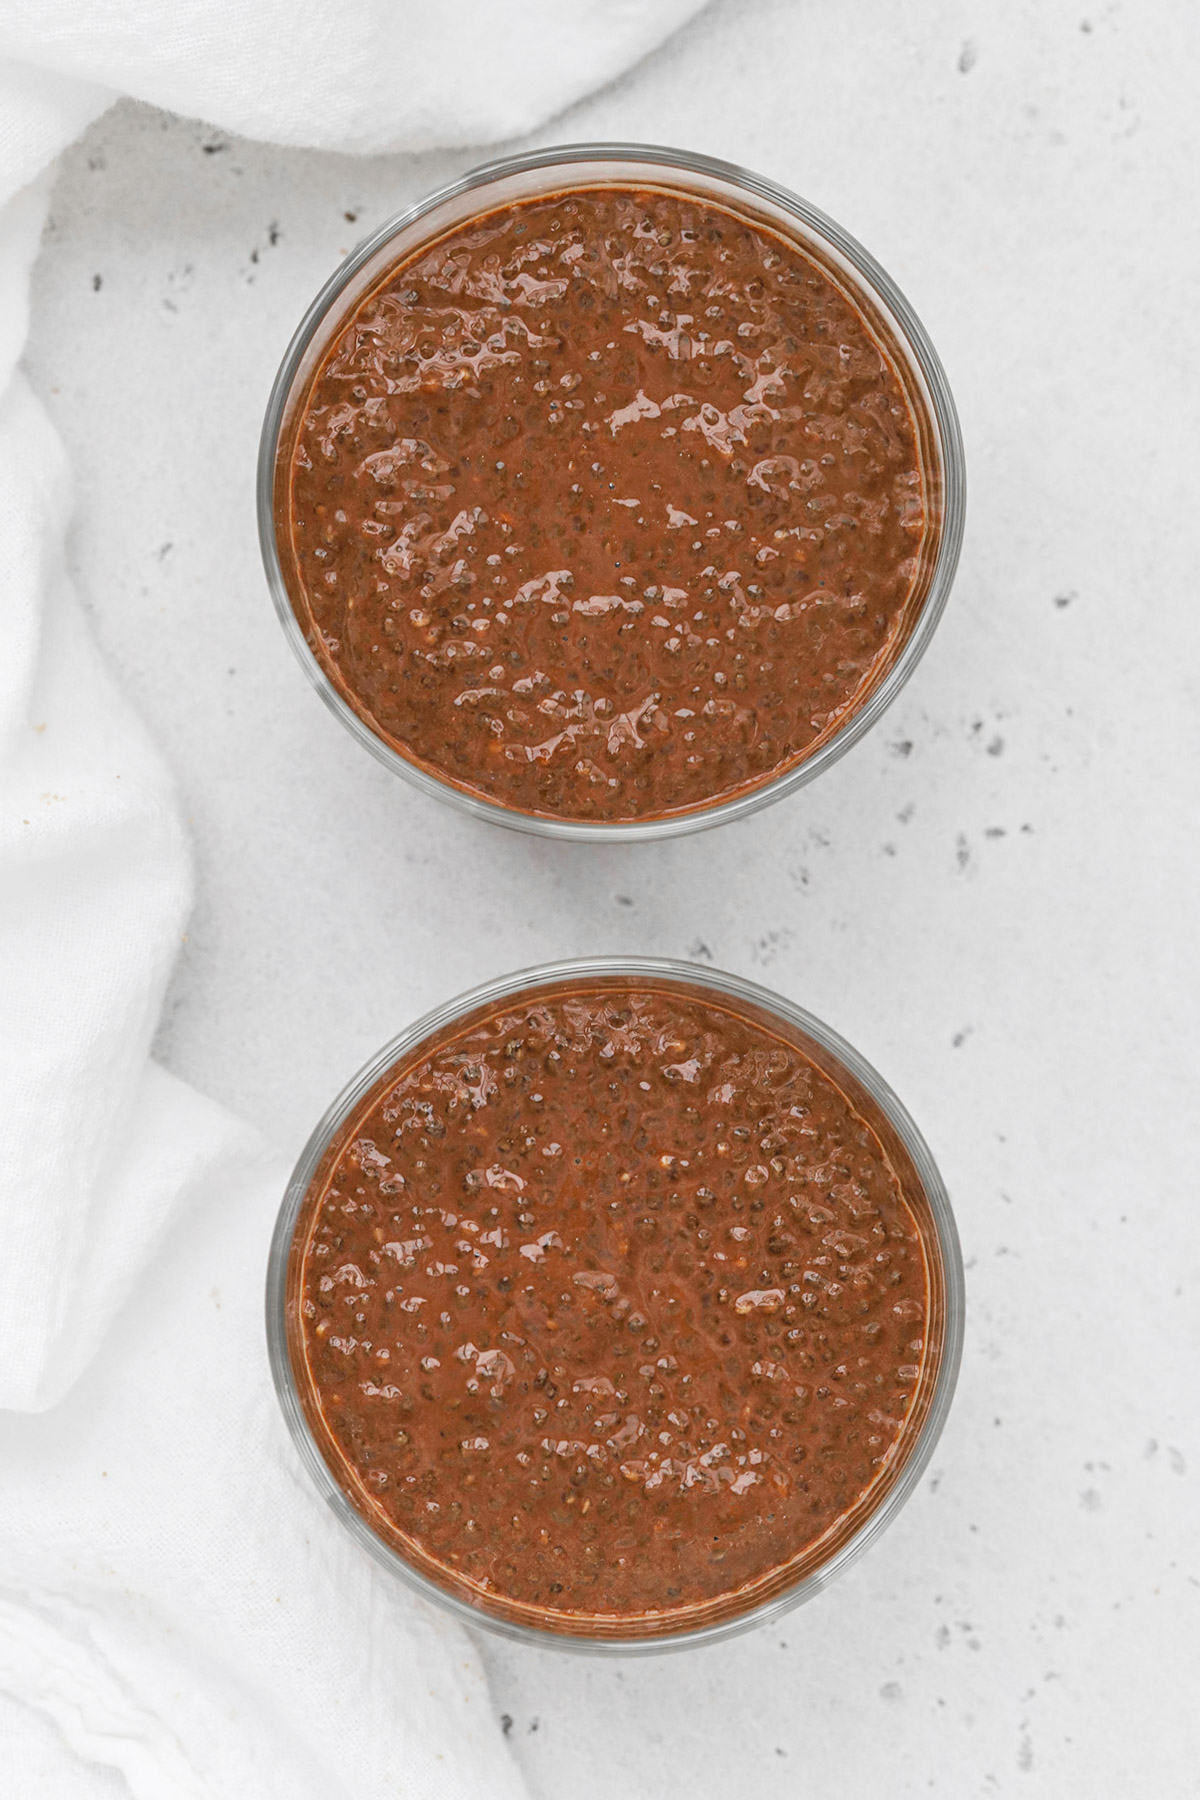 Two bowls of chocolate chia pudding